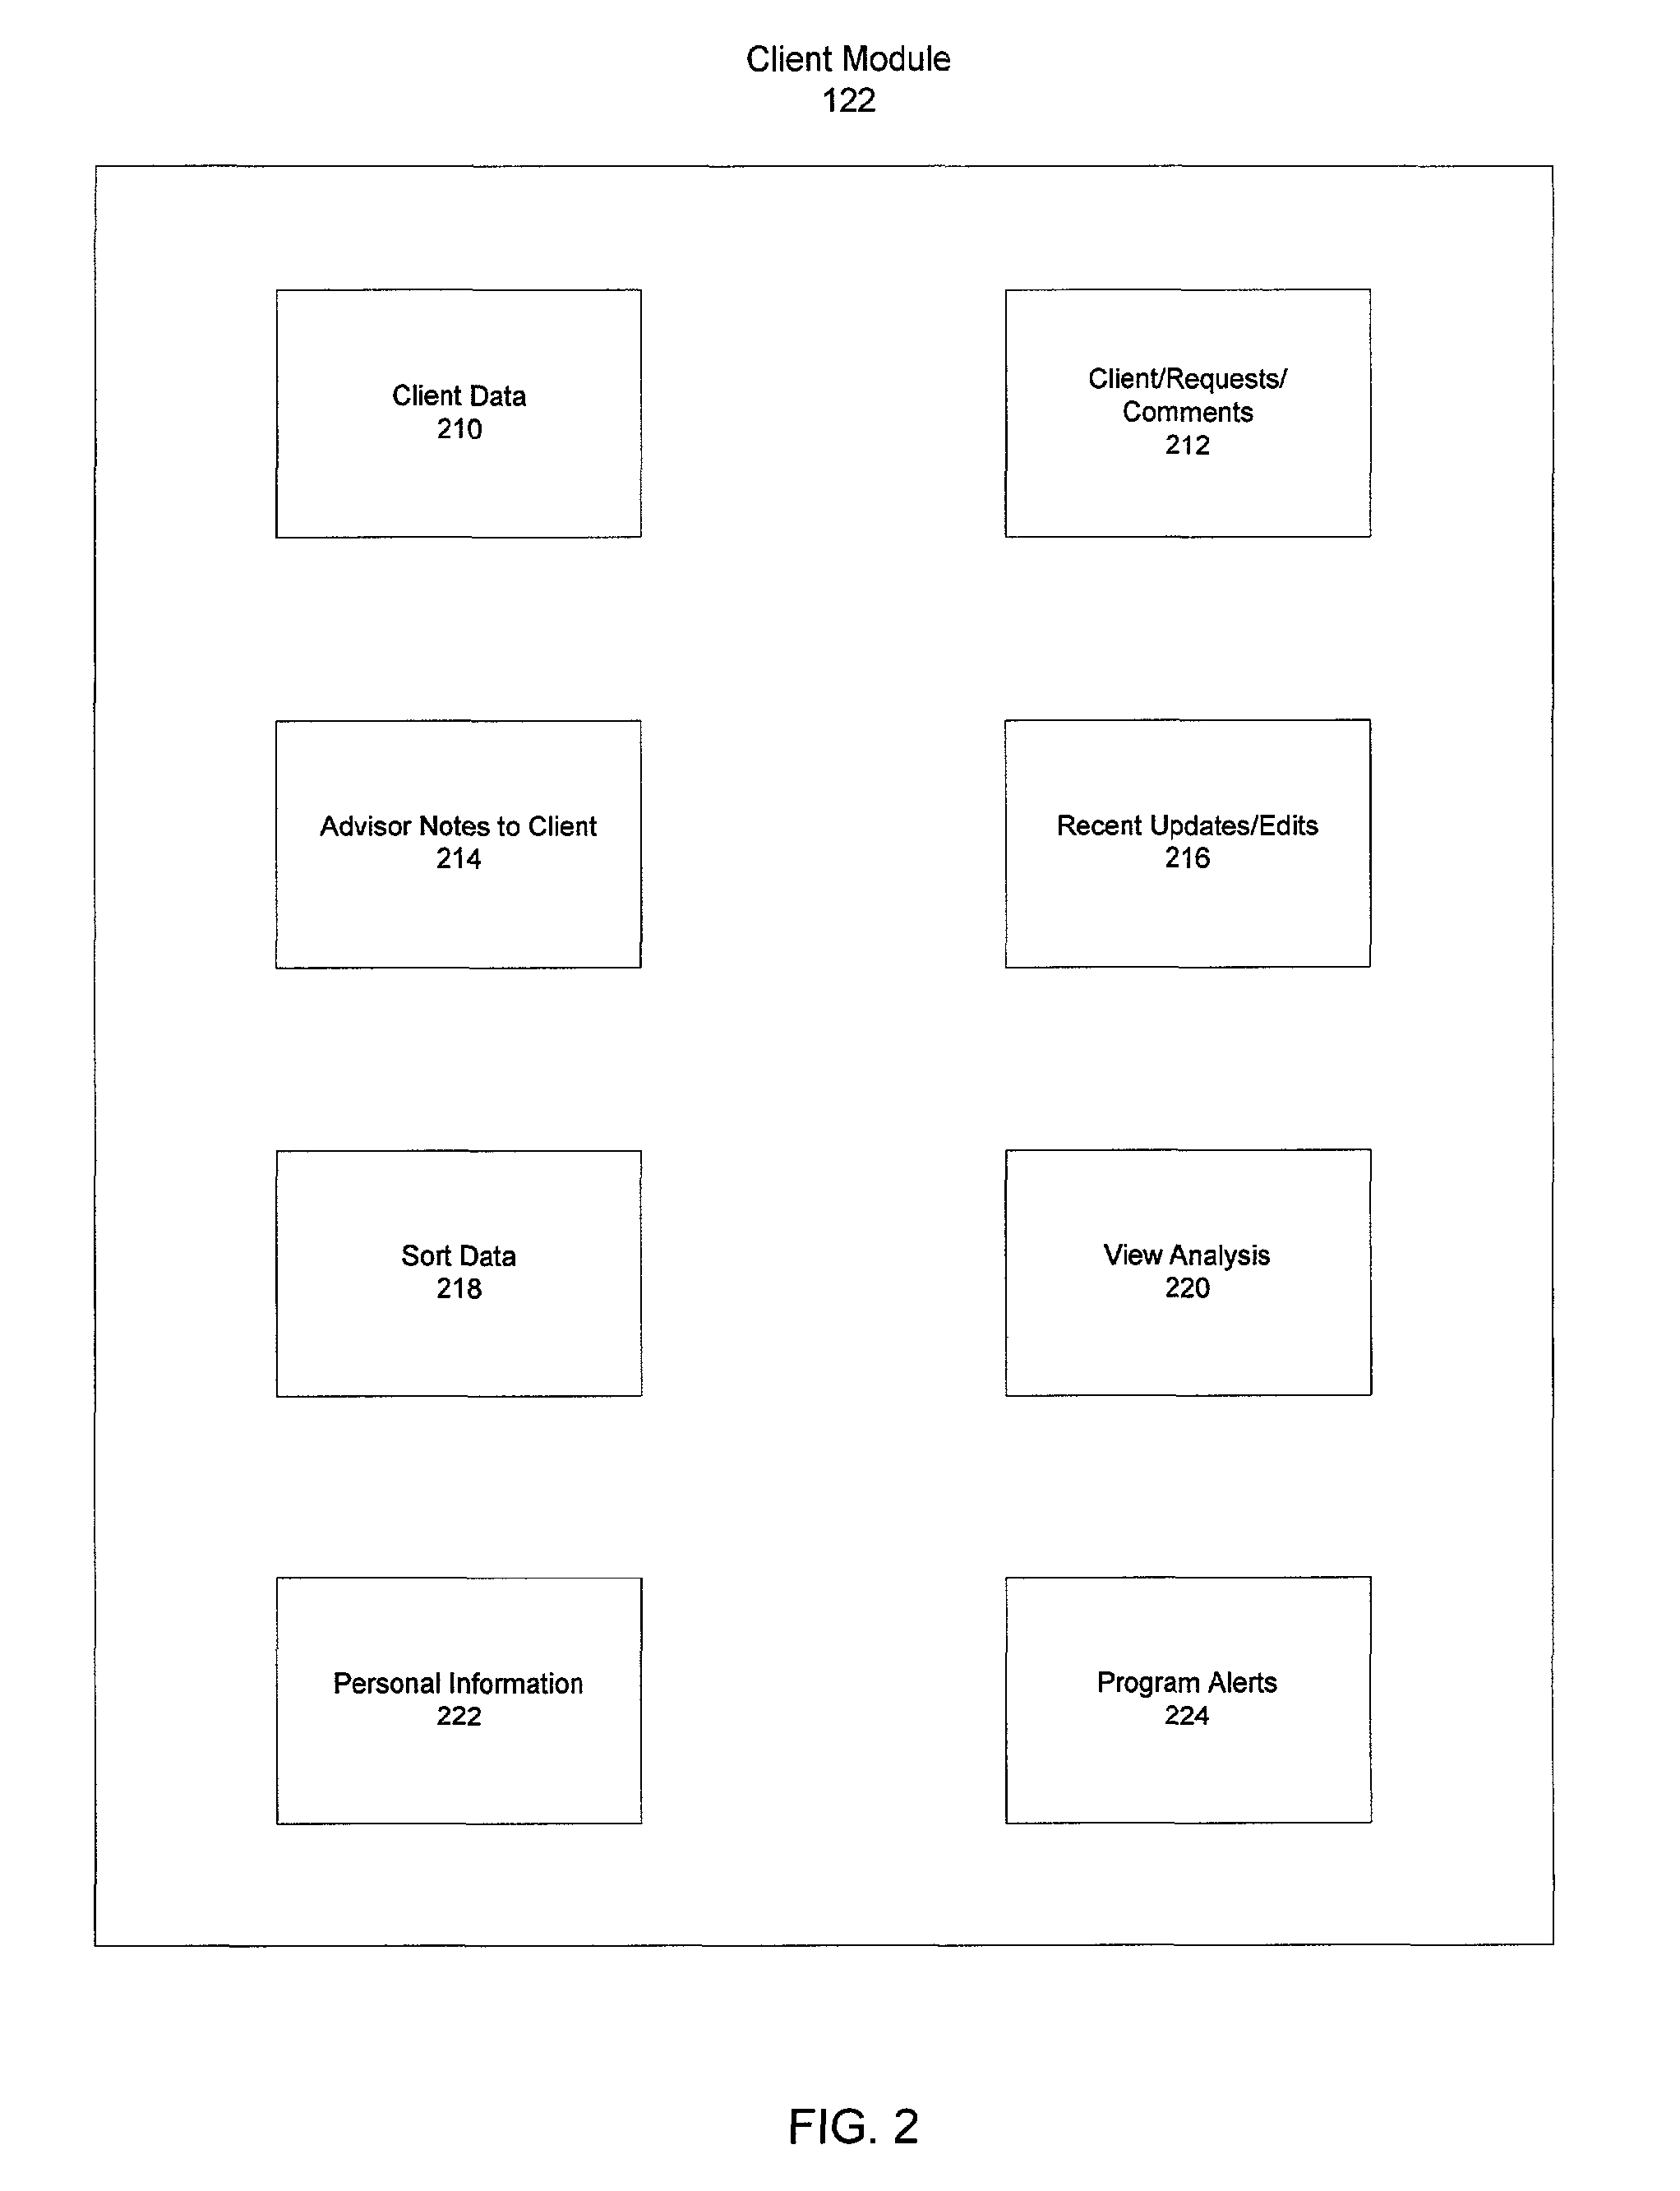 Method and system for enabling collaboration between advisors and clients